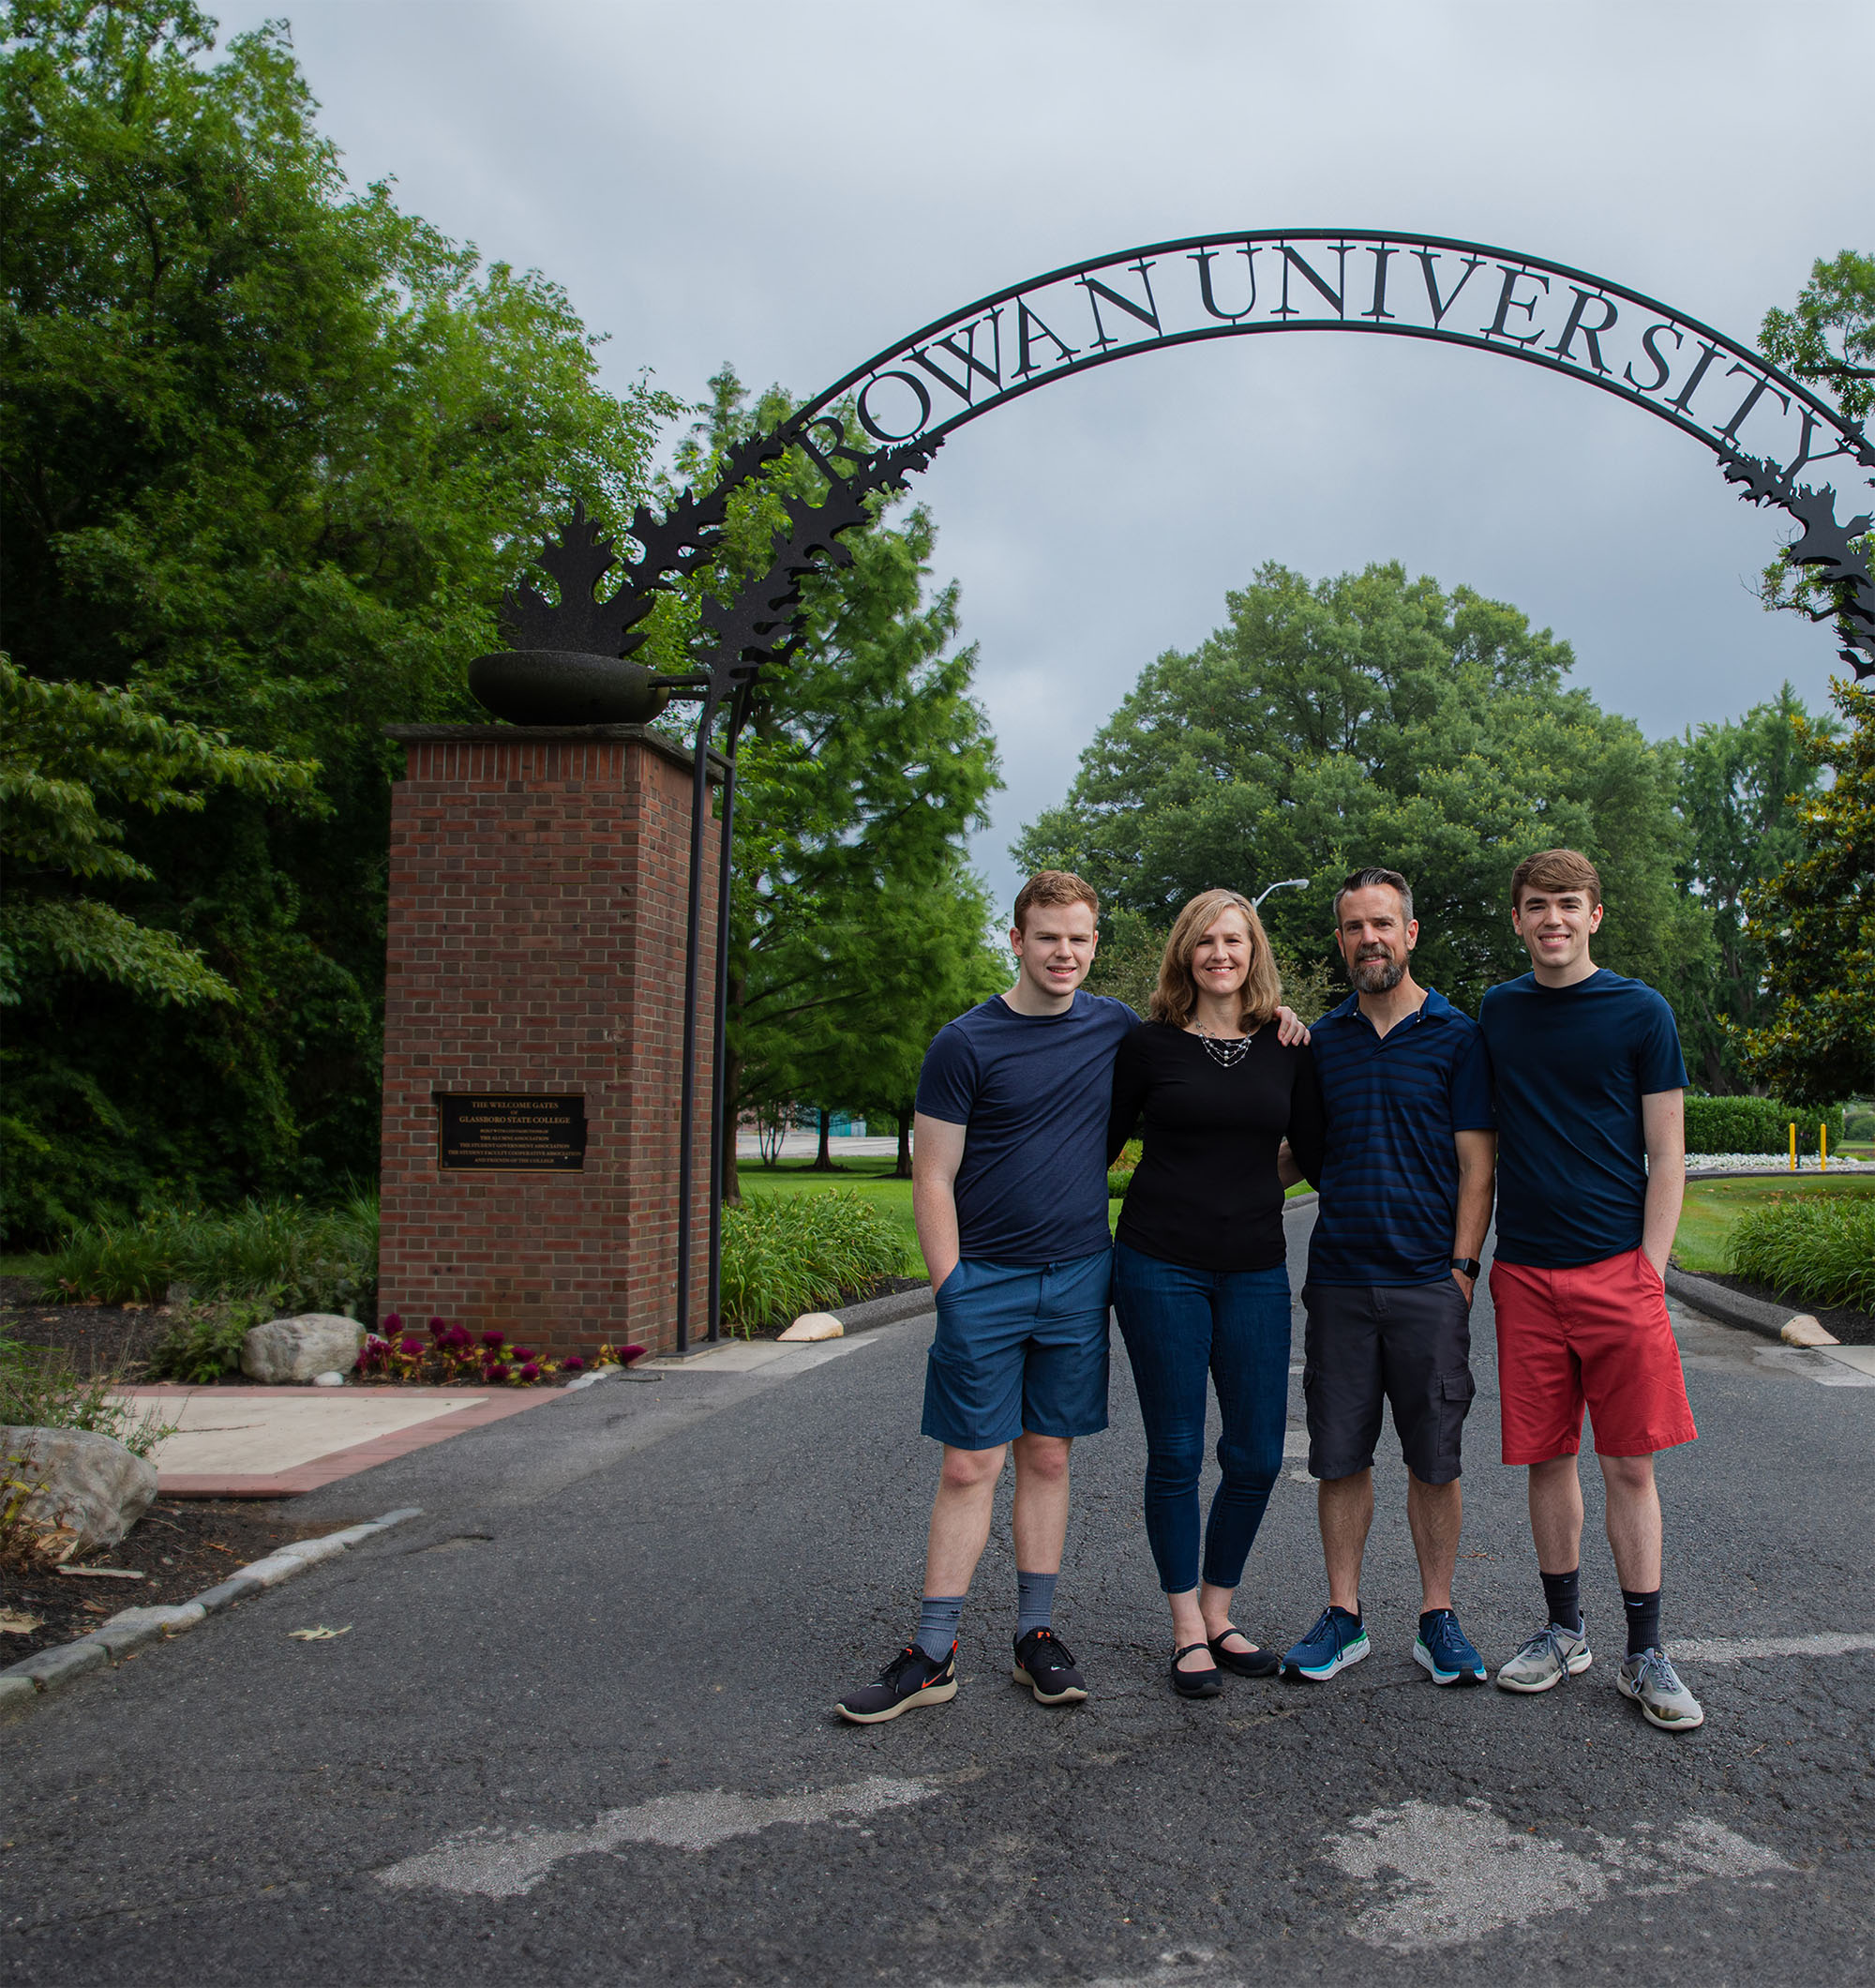 A family of four poses for a photo under the Rowan University arch.